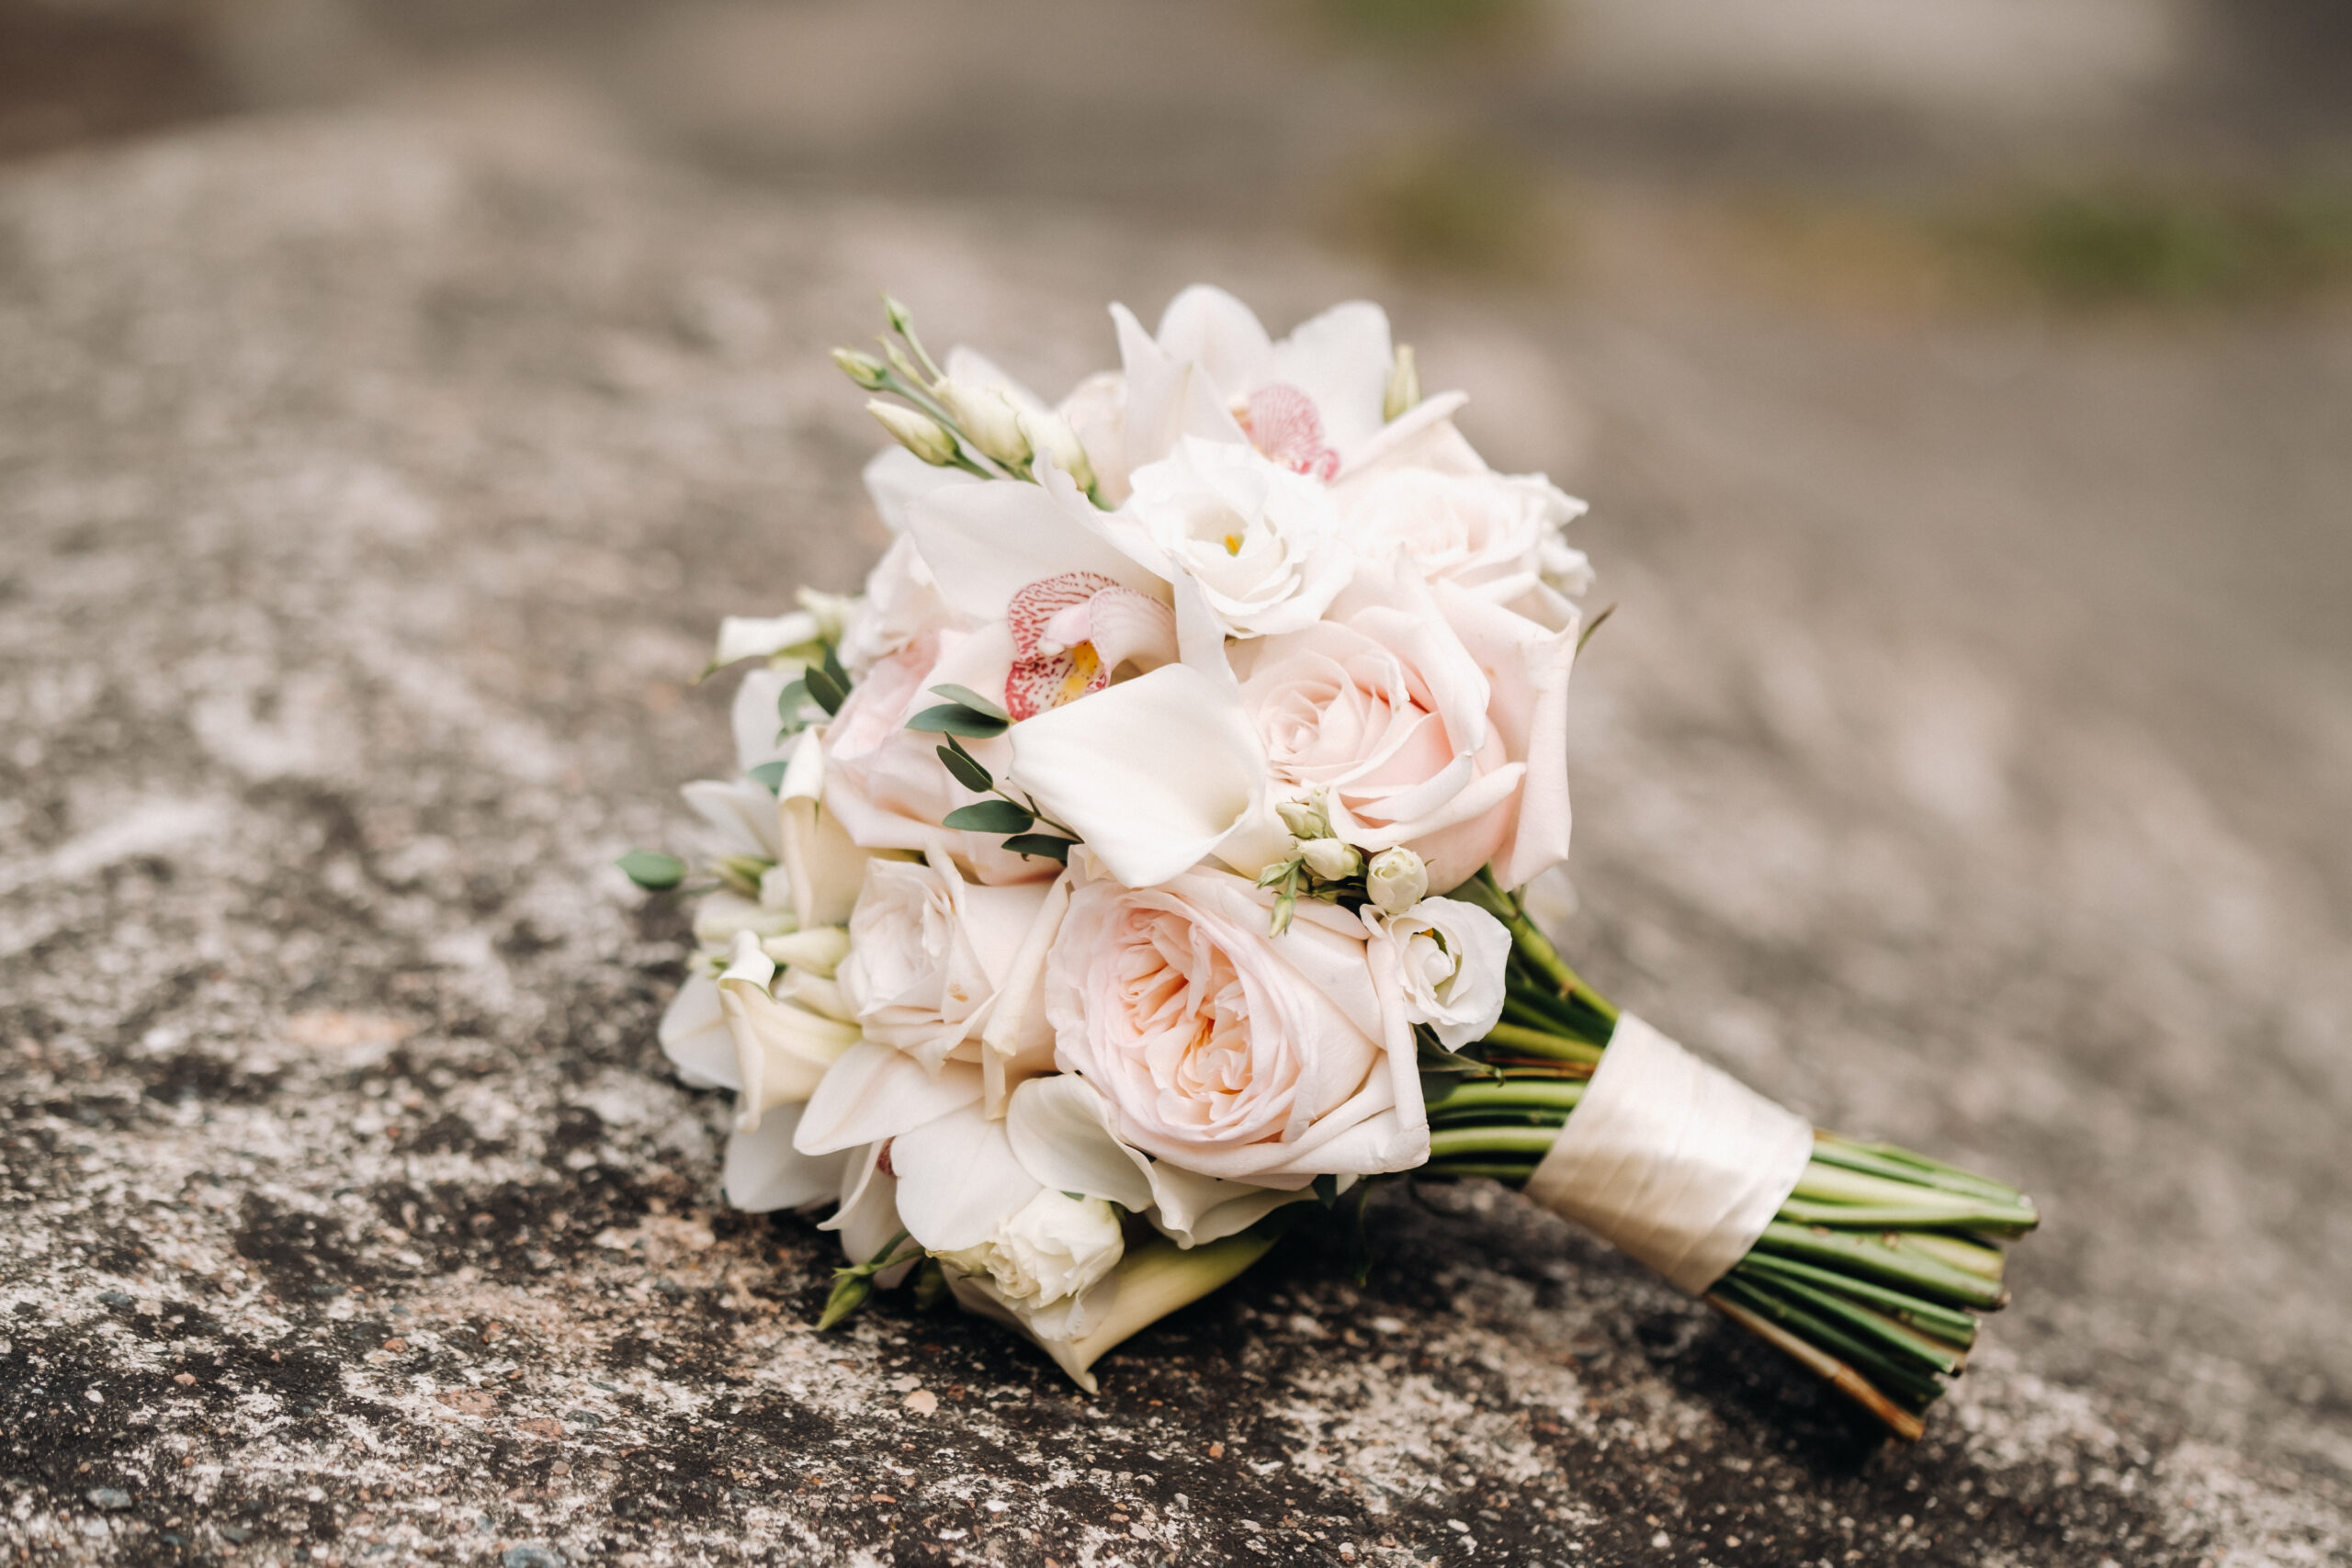 Wedding bouquet with roses and boutonniere.The decor at the wedding